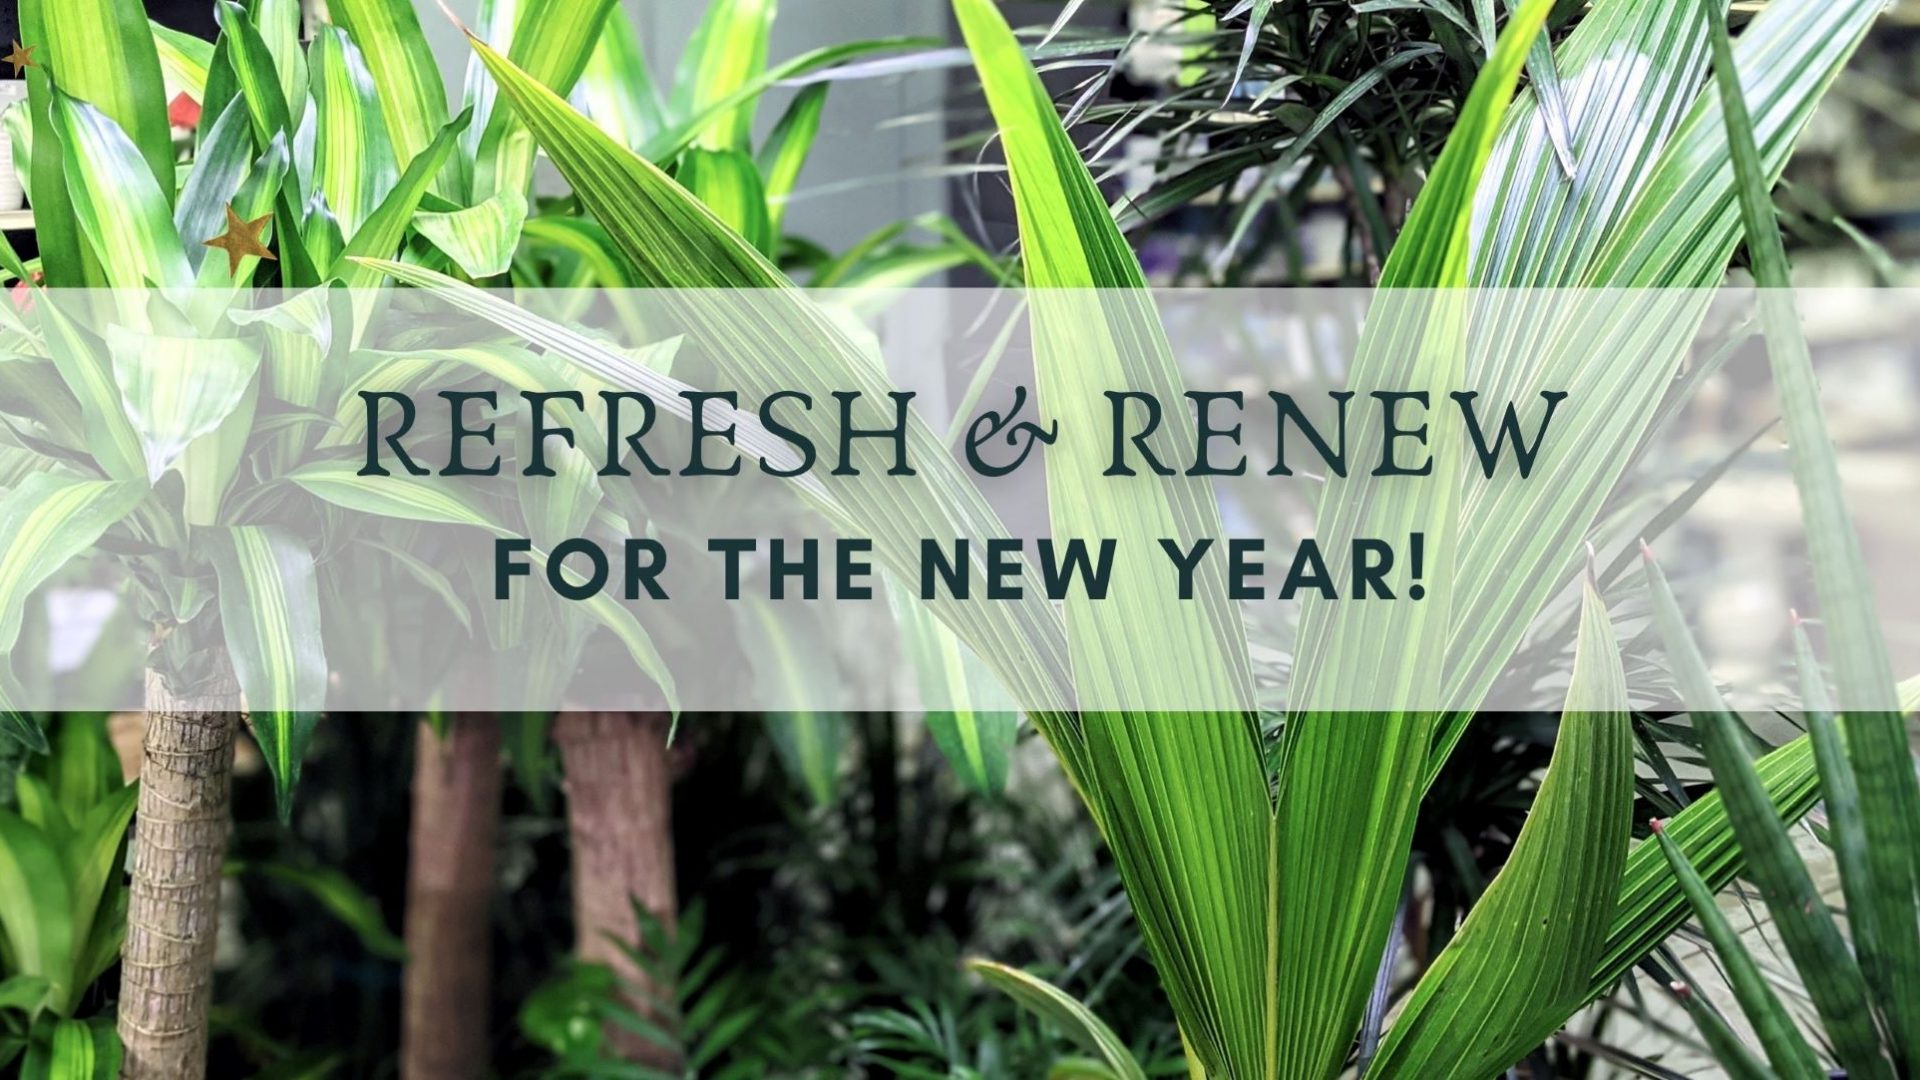 large houseplants behind refresh and renew for the the new year banner